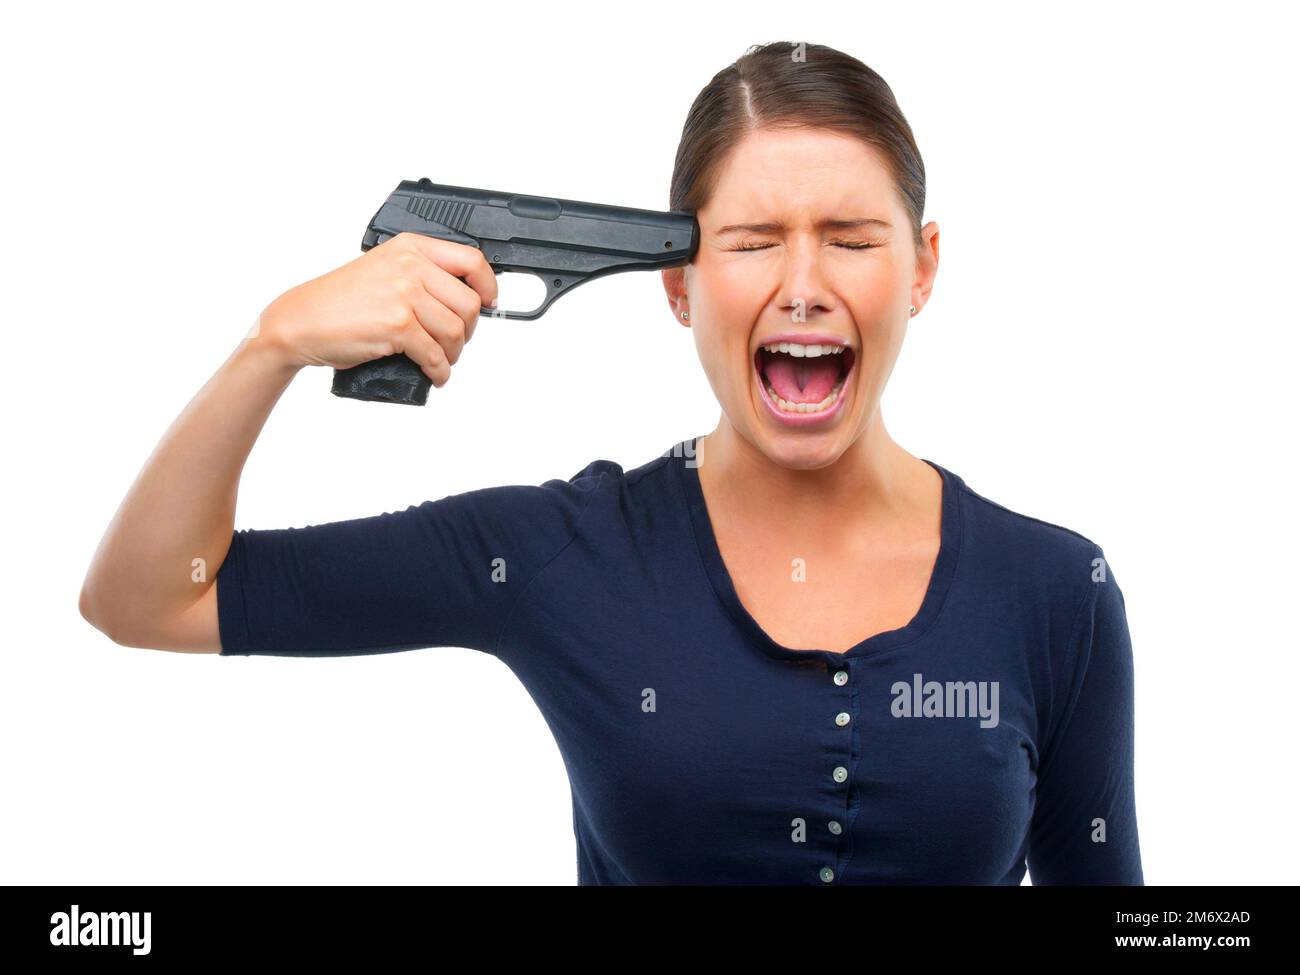 Ive had enough. Studio shot of a young woman pointing a gun at her head isolated on white. Stock Photo